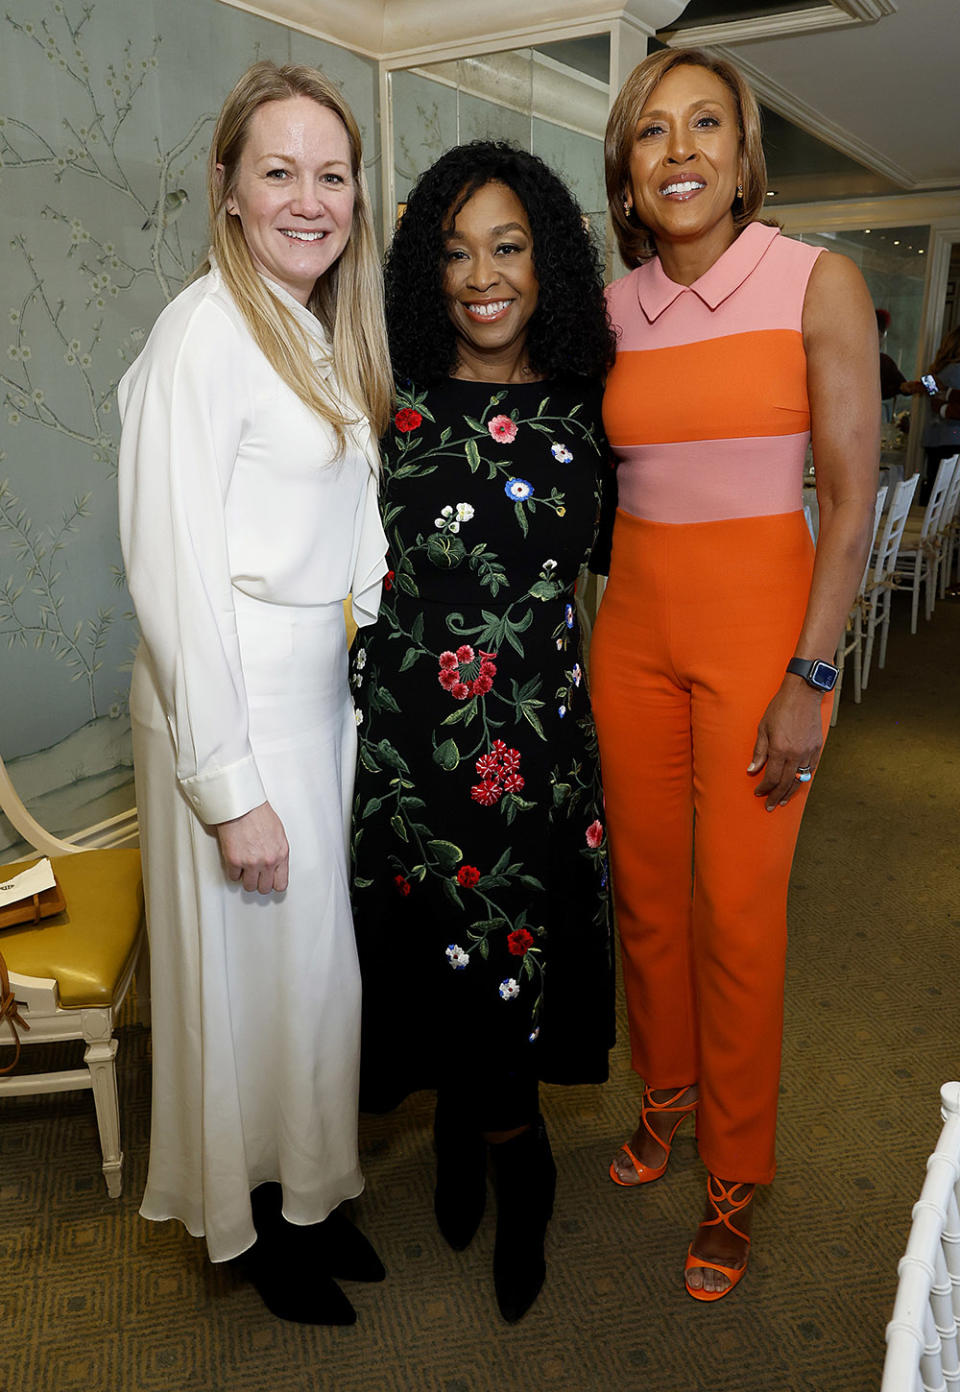 (L-R) Wendy Naugle, Shonda Rhimes, and Robin Roberts attend Queen Charlotte High Tea at BG at Bergdorf Goodman on April 04, 2023 in New York City.